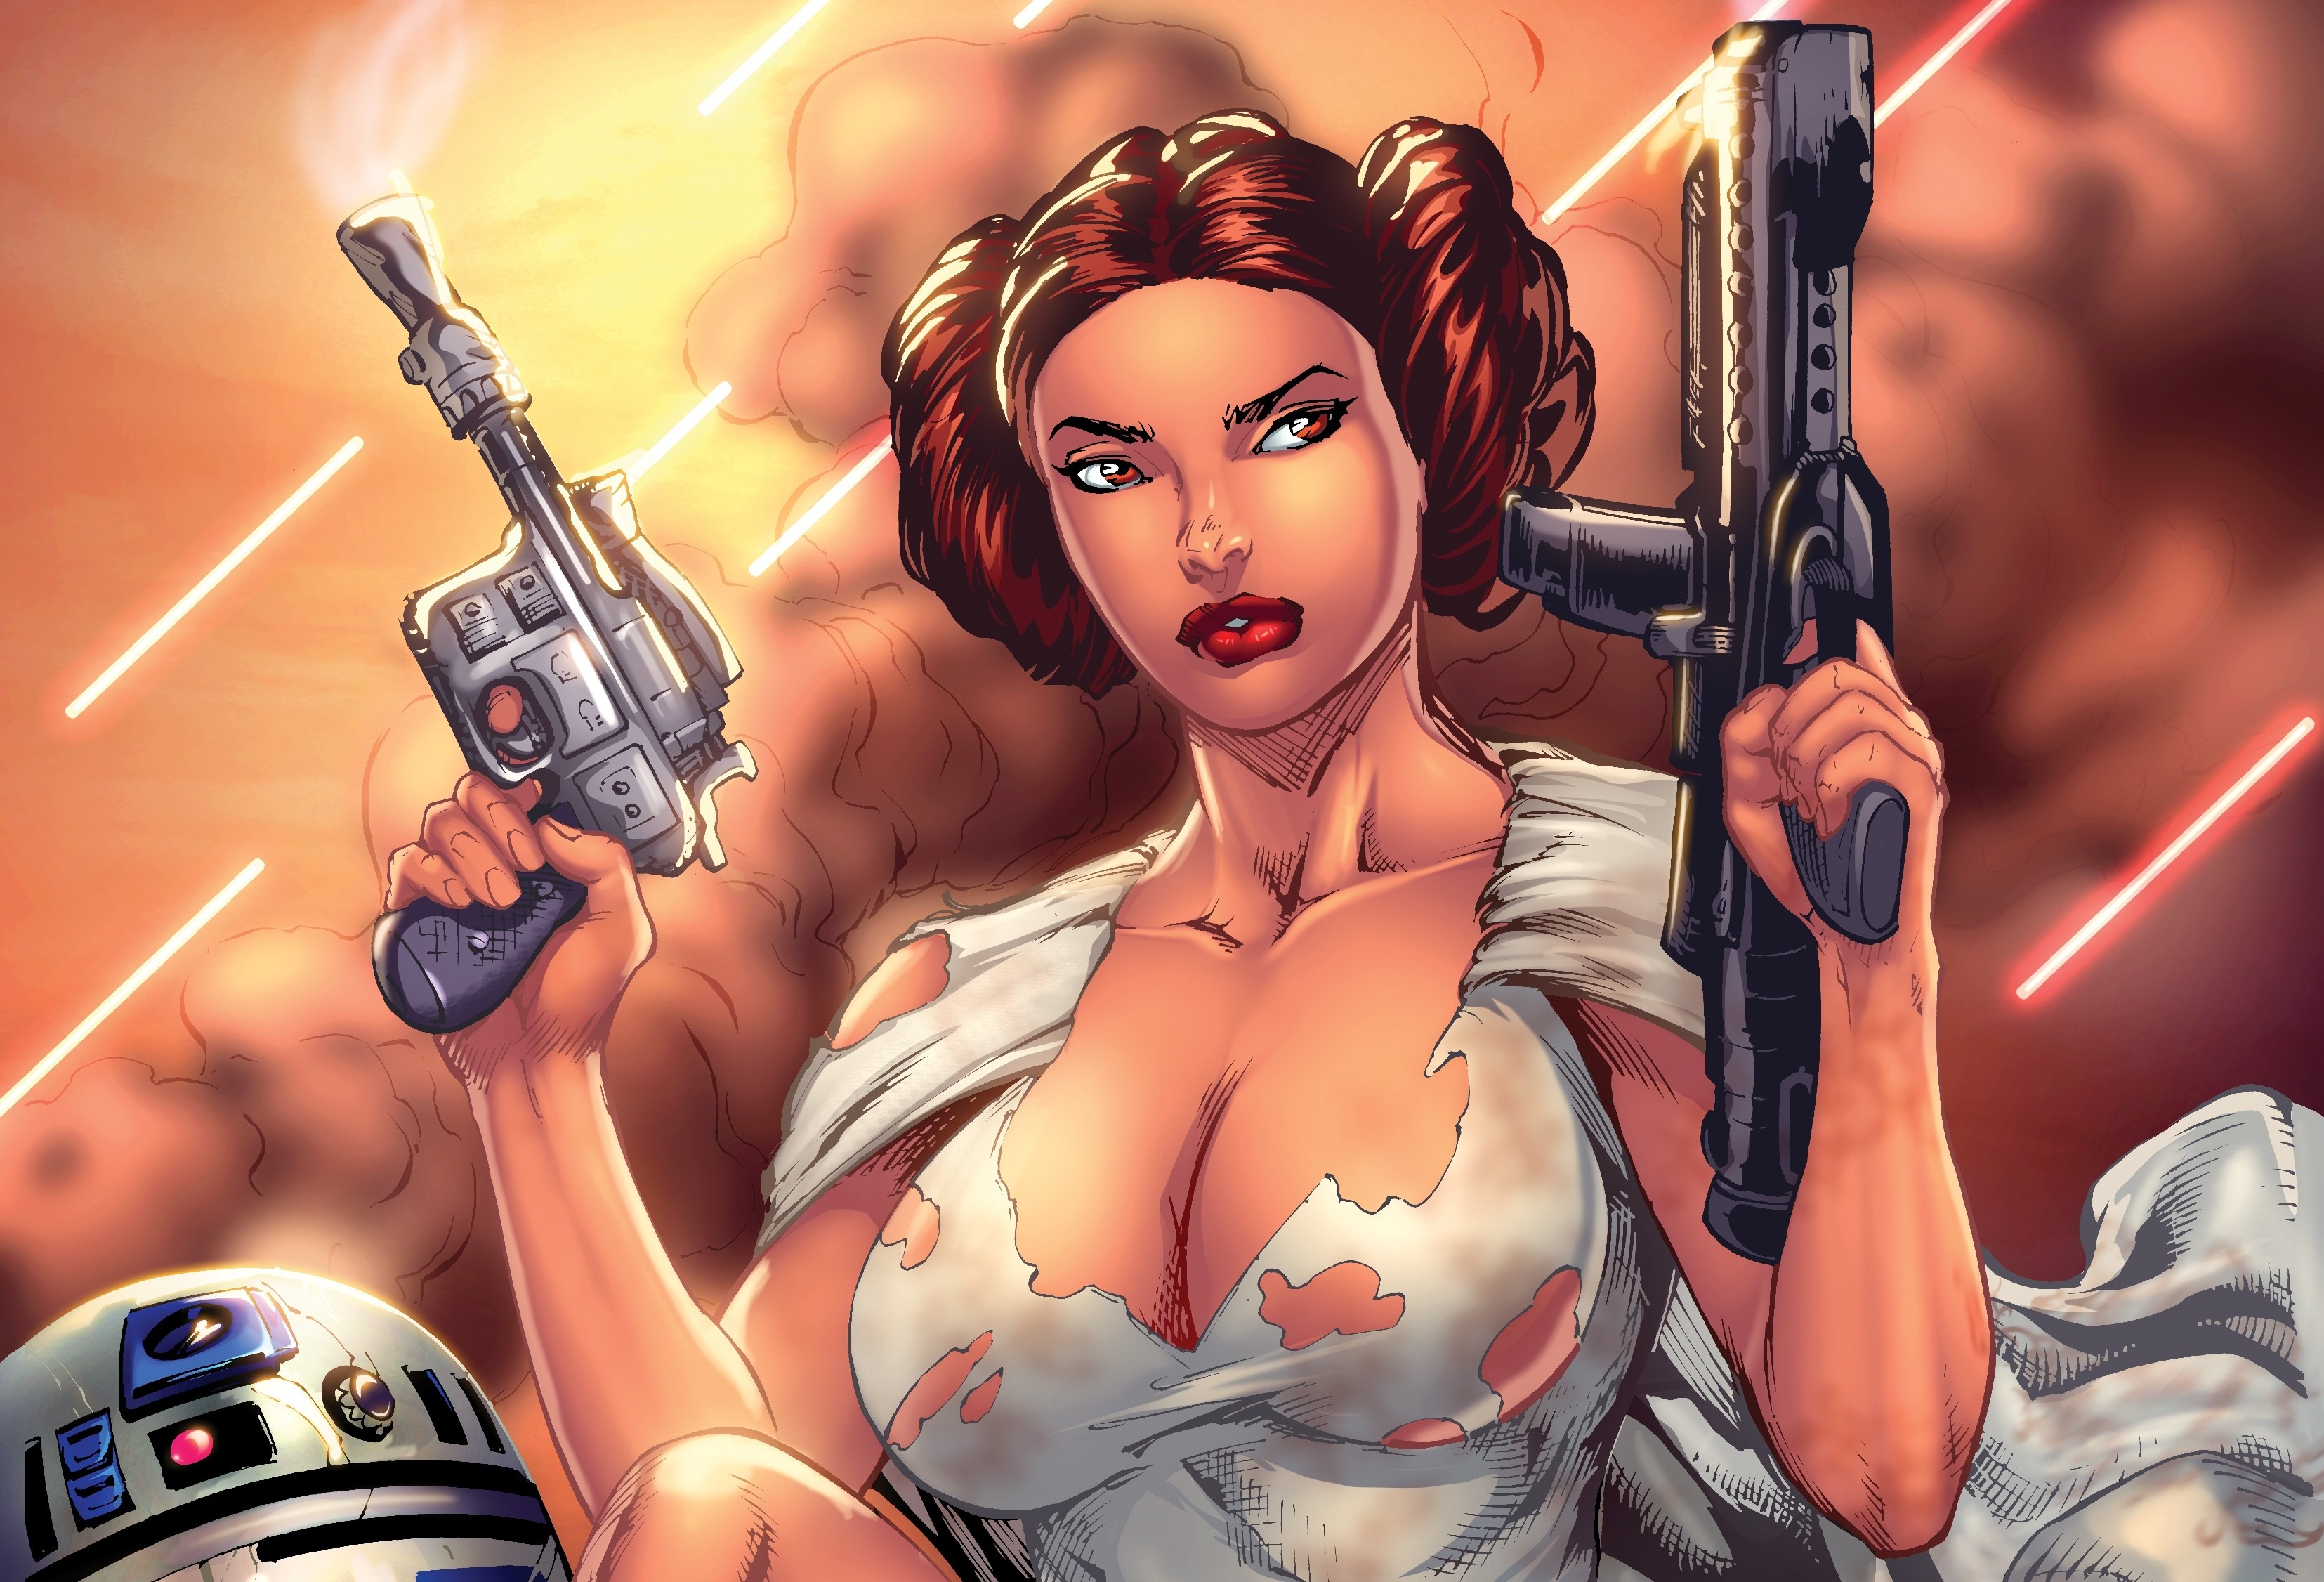 General 3309x2252 Leia Organa artwork Star Wars big boobs blaster R2-D2 looking away boobs science fiction Star Wars Heroes Star Wars Droids red lipstick women science fiction women redhead torn clothes cleavage movie characters digital art